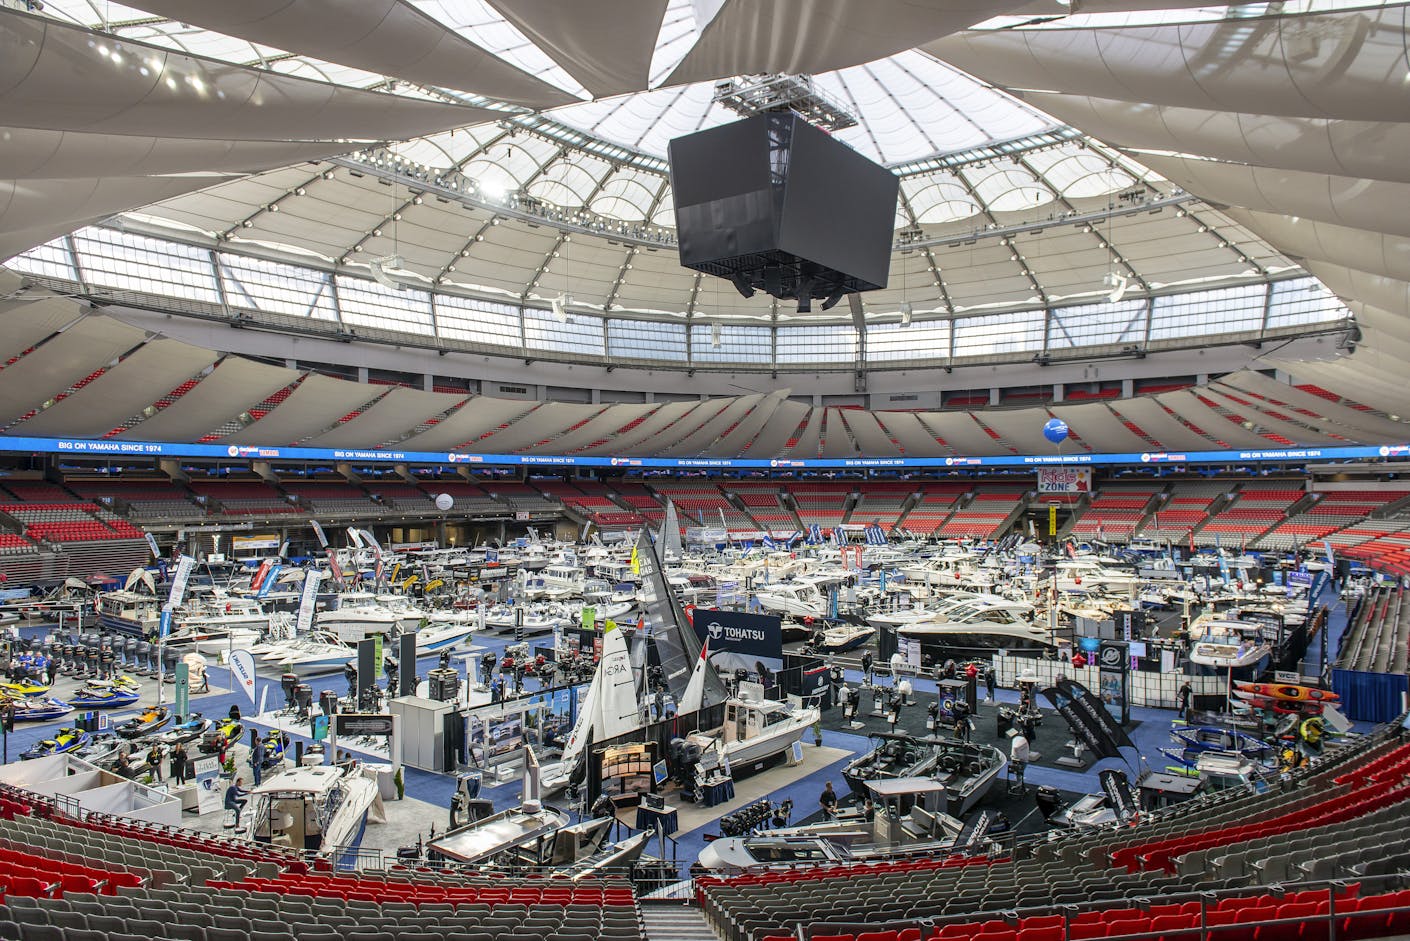 Year in Review: Looking back on 2020 at BC Place – BC Place